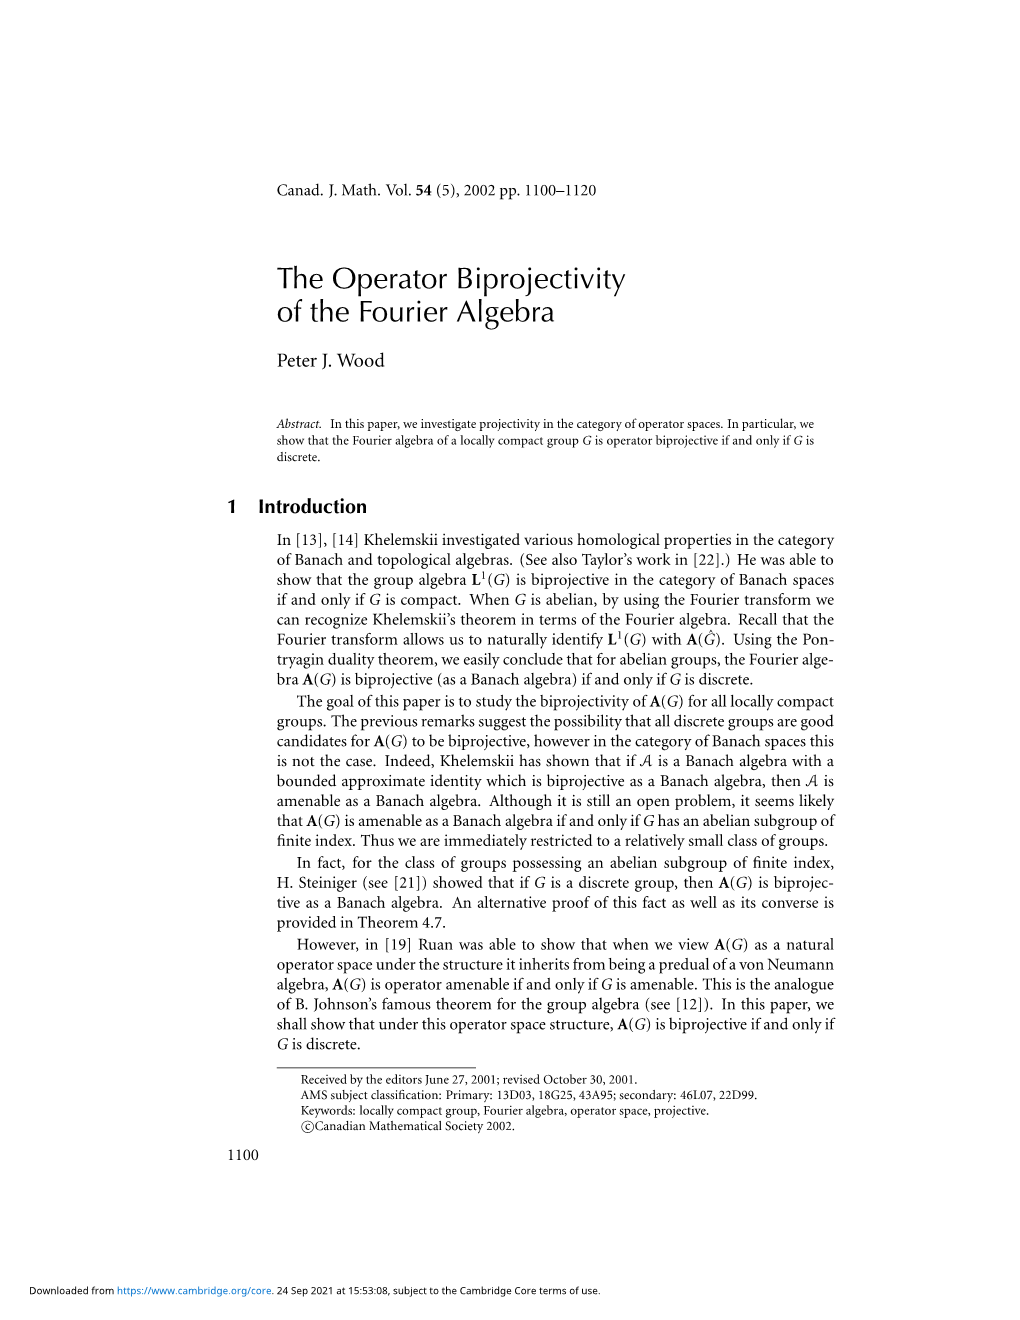 The Operator Biprojectivity of the Fourier Algebra